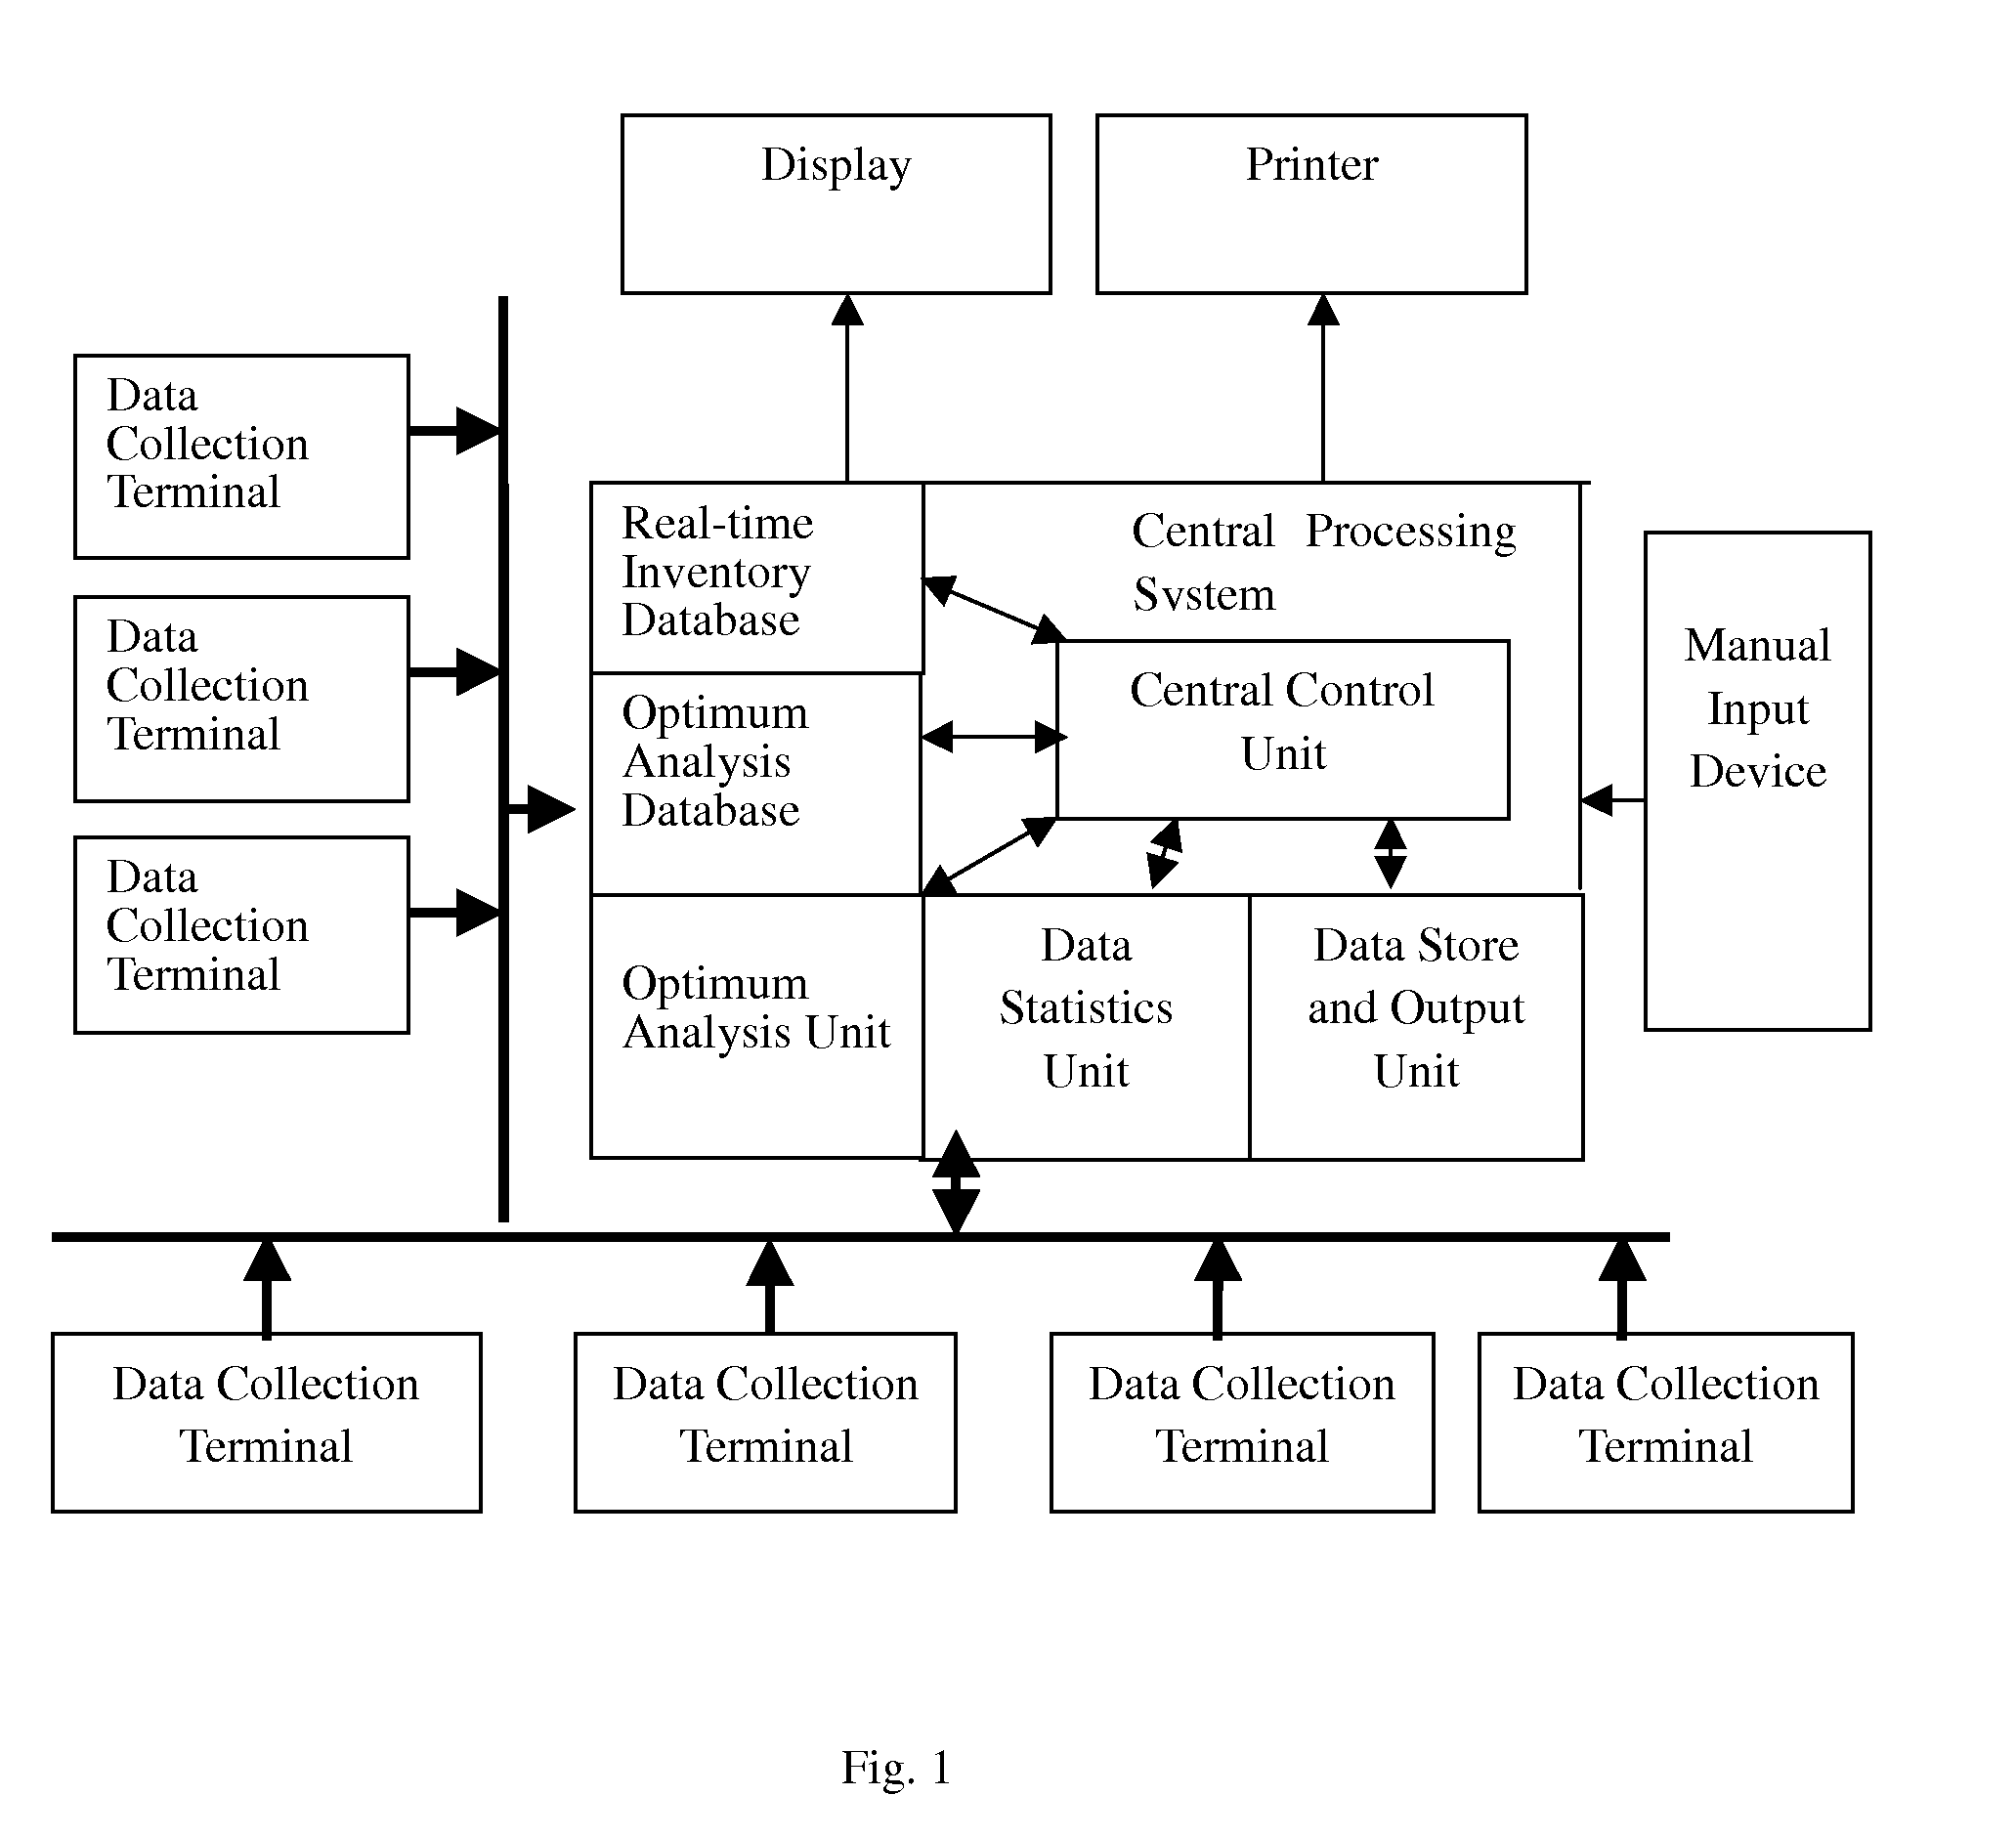 Control system for enterprise production based on inventory data